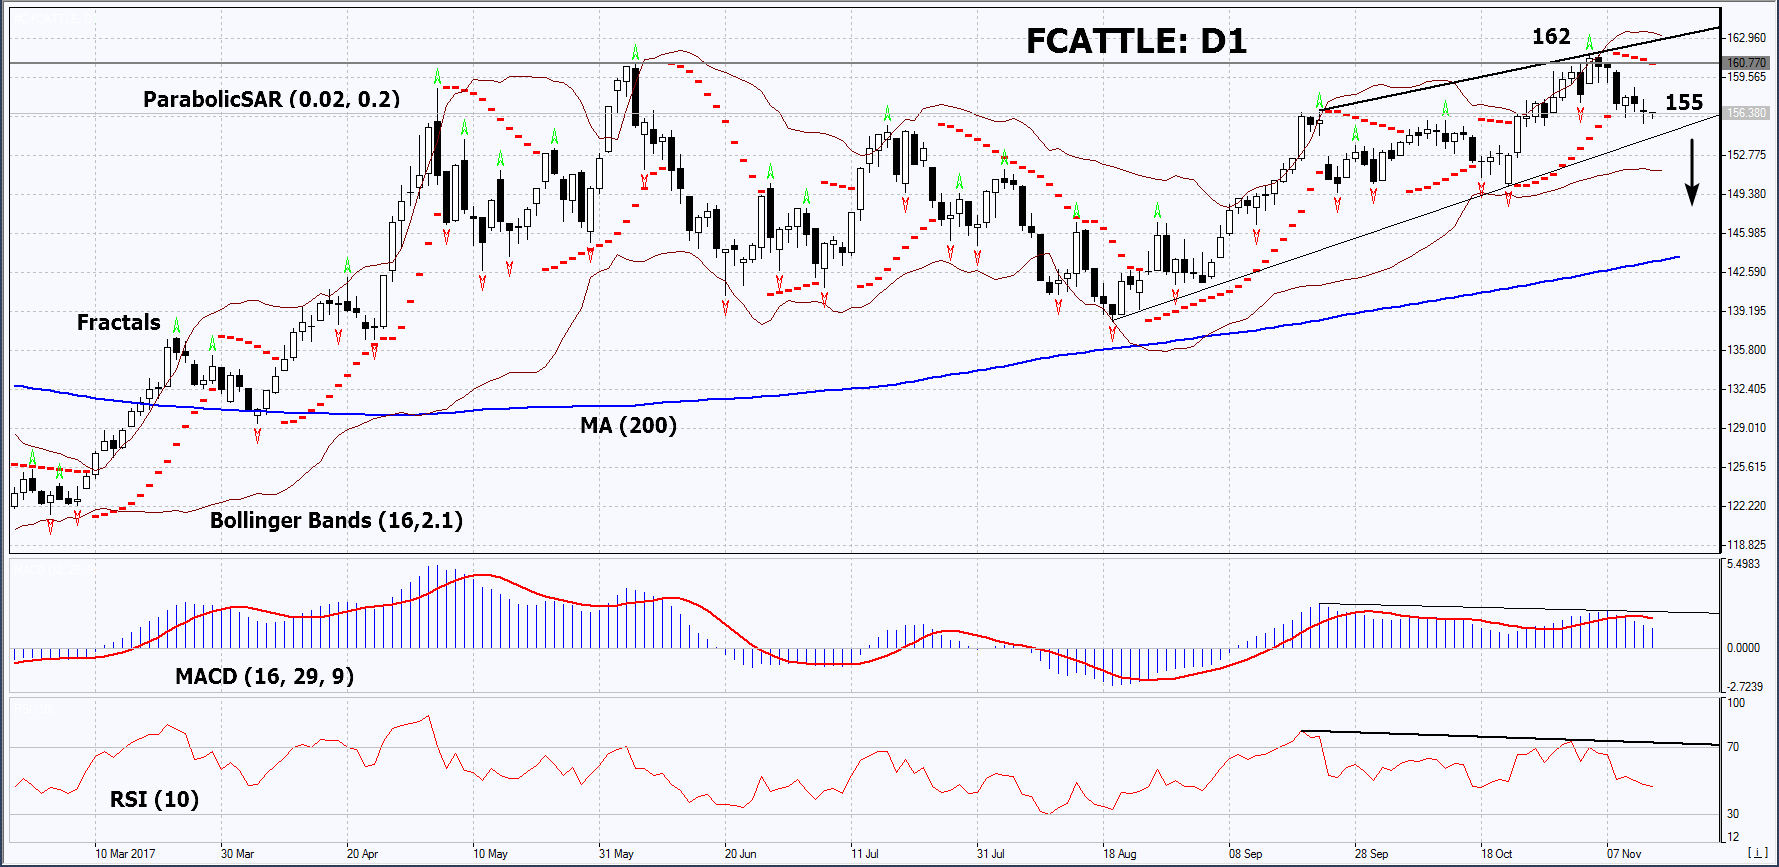 FCATTLE Daily Chart